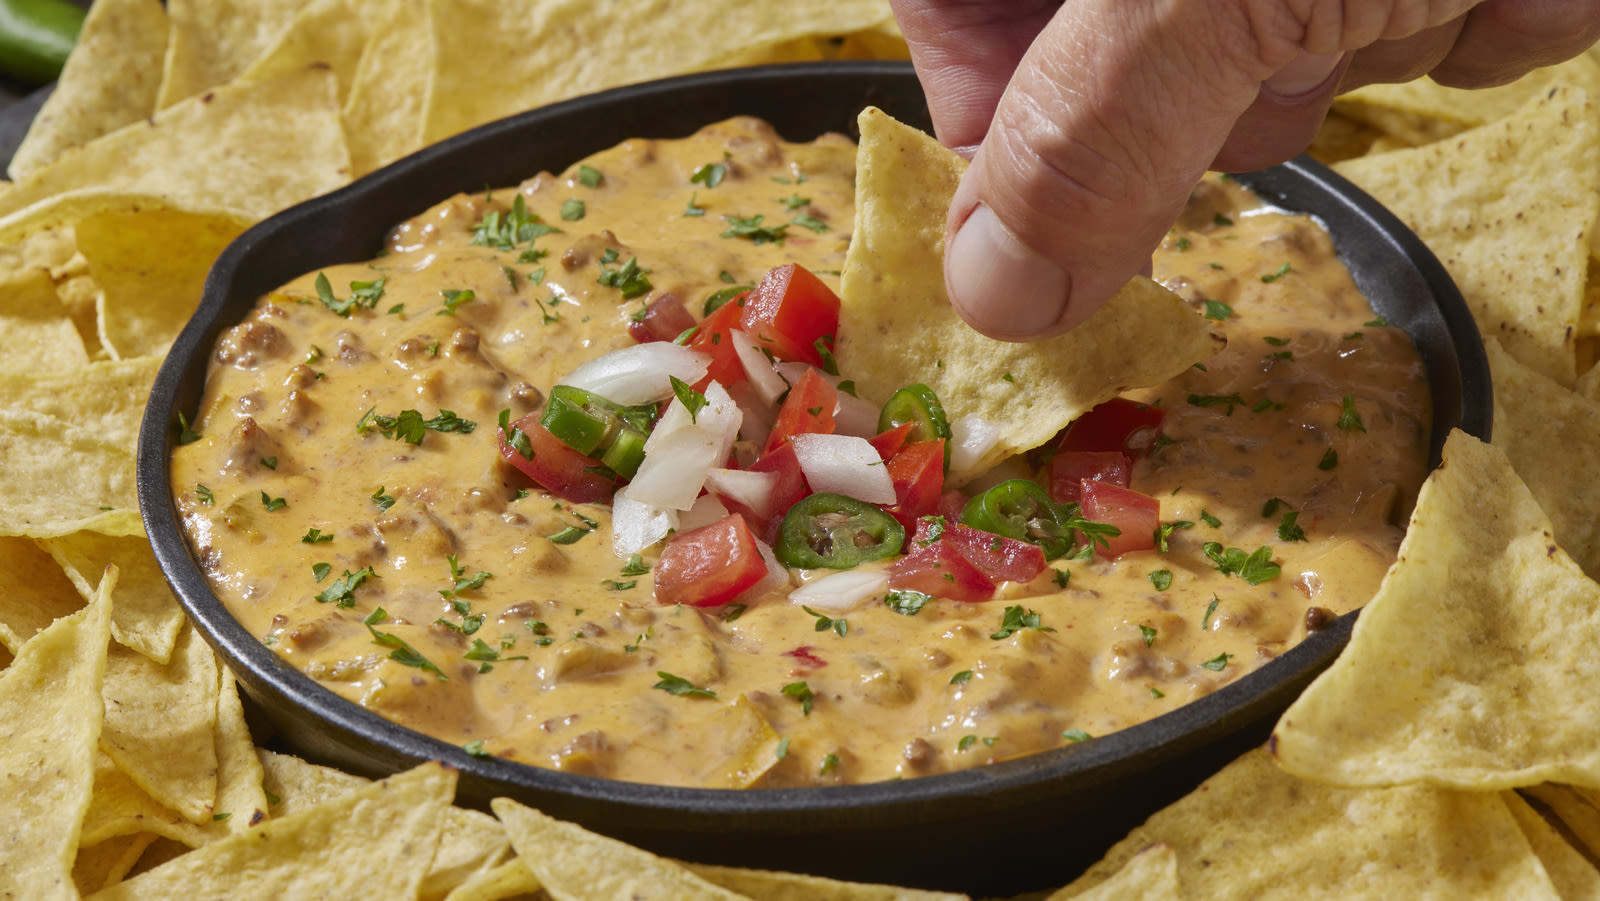 What Are The Best Cheeses To Use For Nacho Sauce? We Asked An Expert